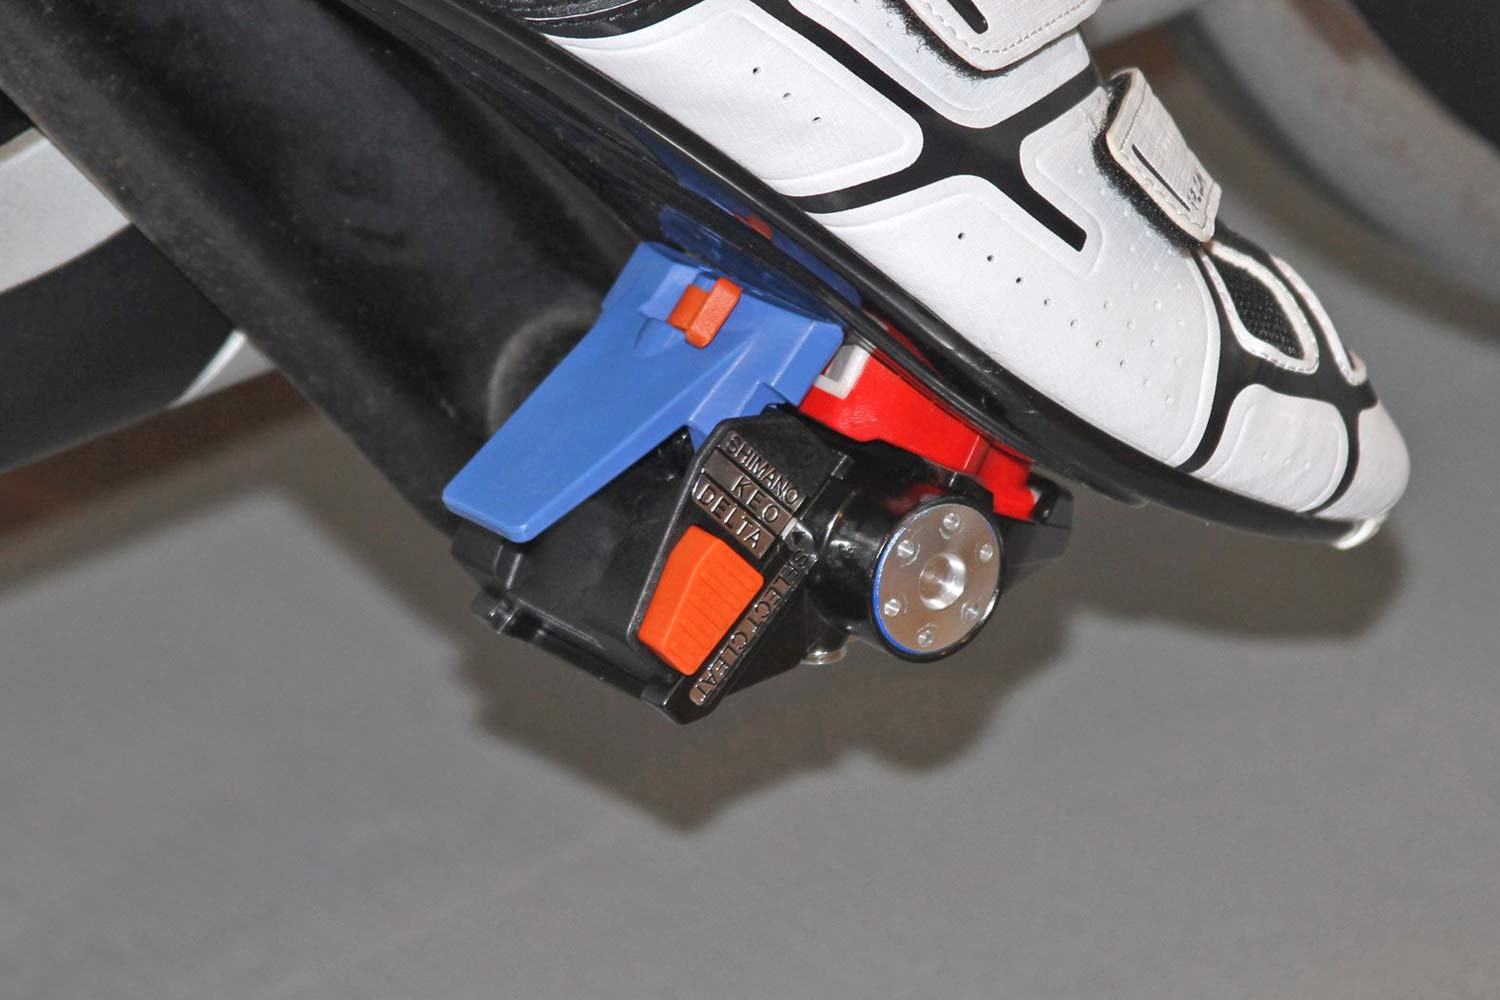 Fit5 universal Indoor Cycle Pedals; Look Delta or Keo, Shimano SPD-SL or SPD, toe-clip compatibility, on spin bike